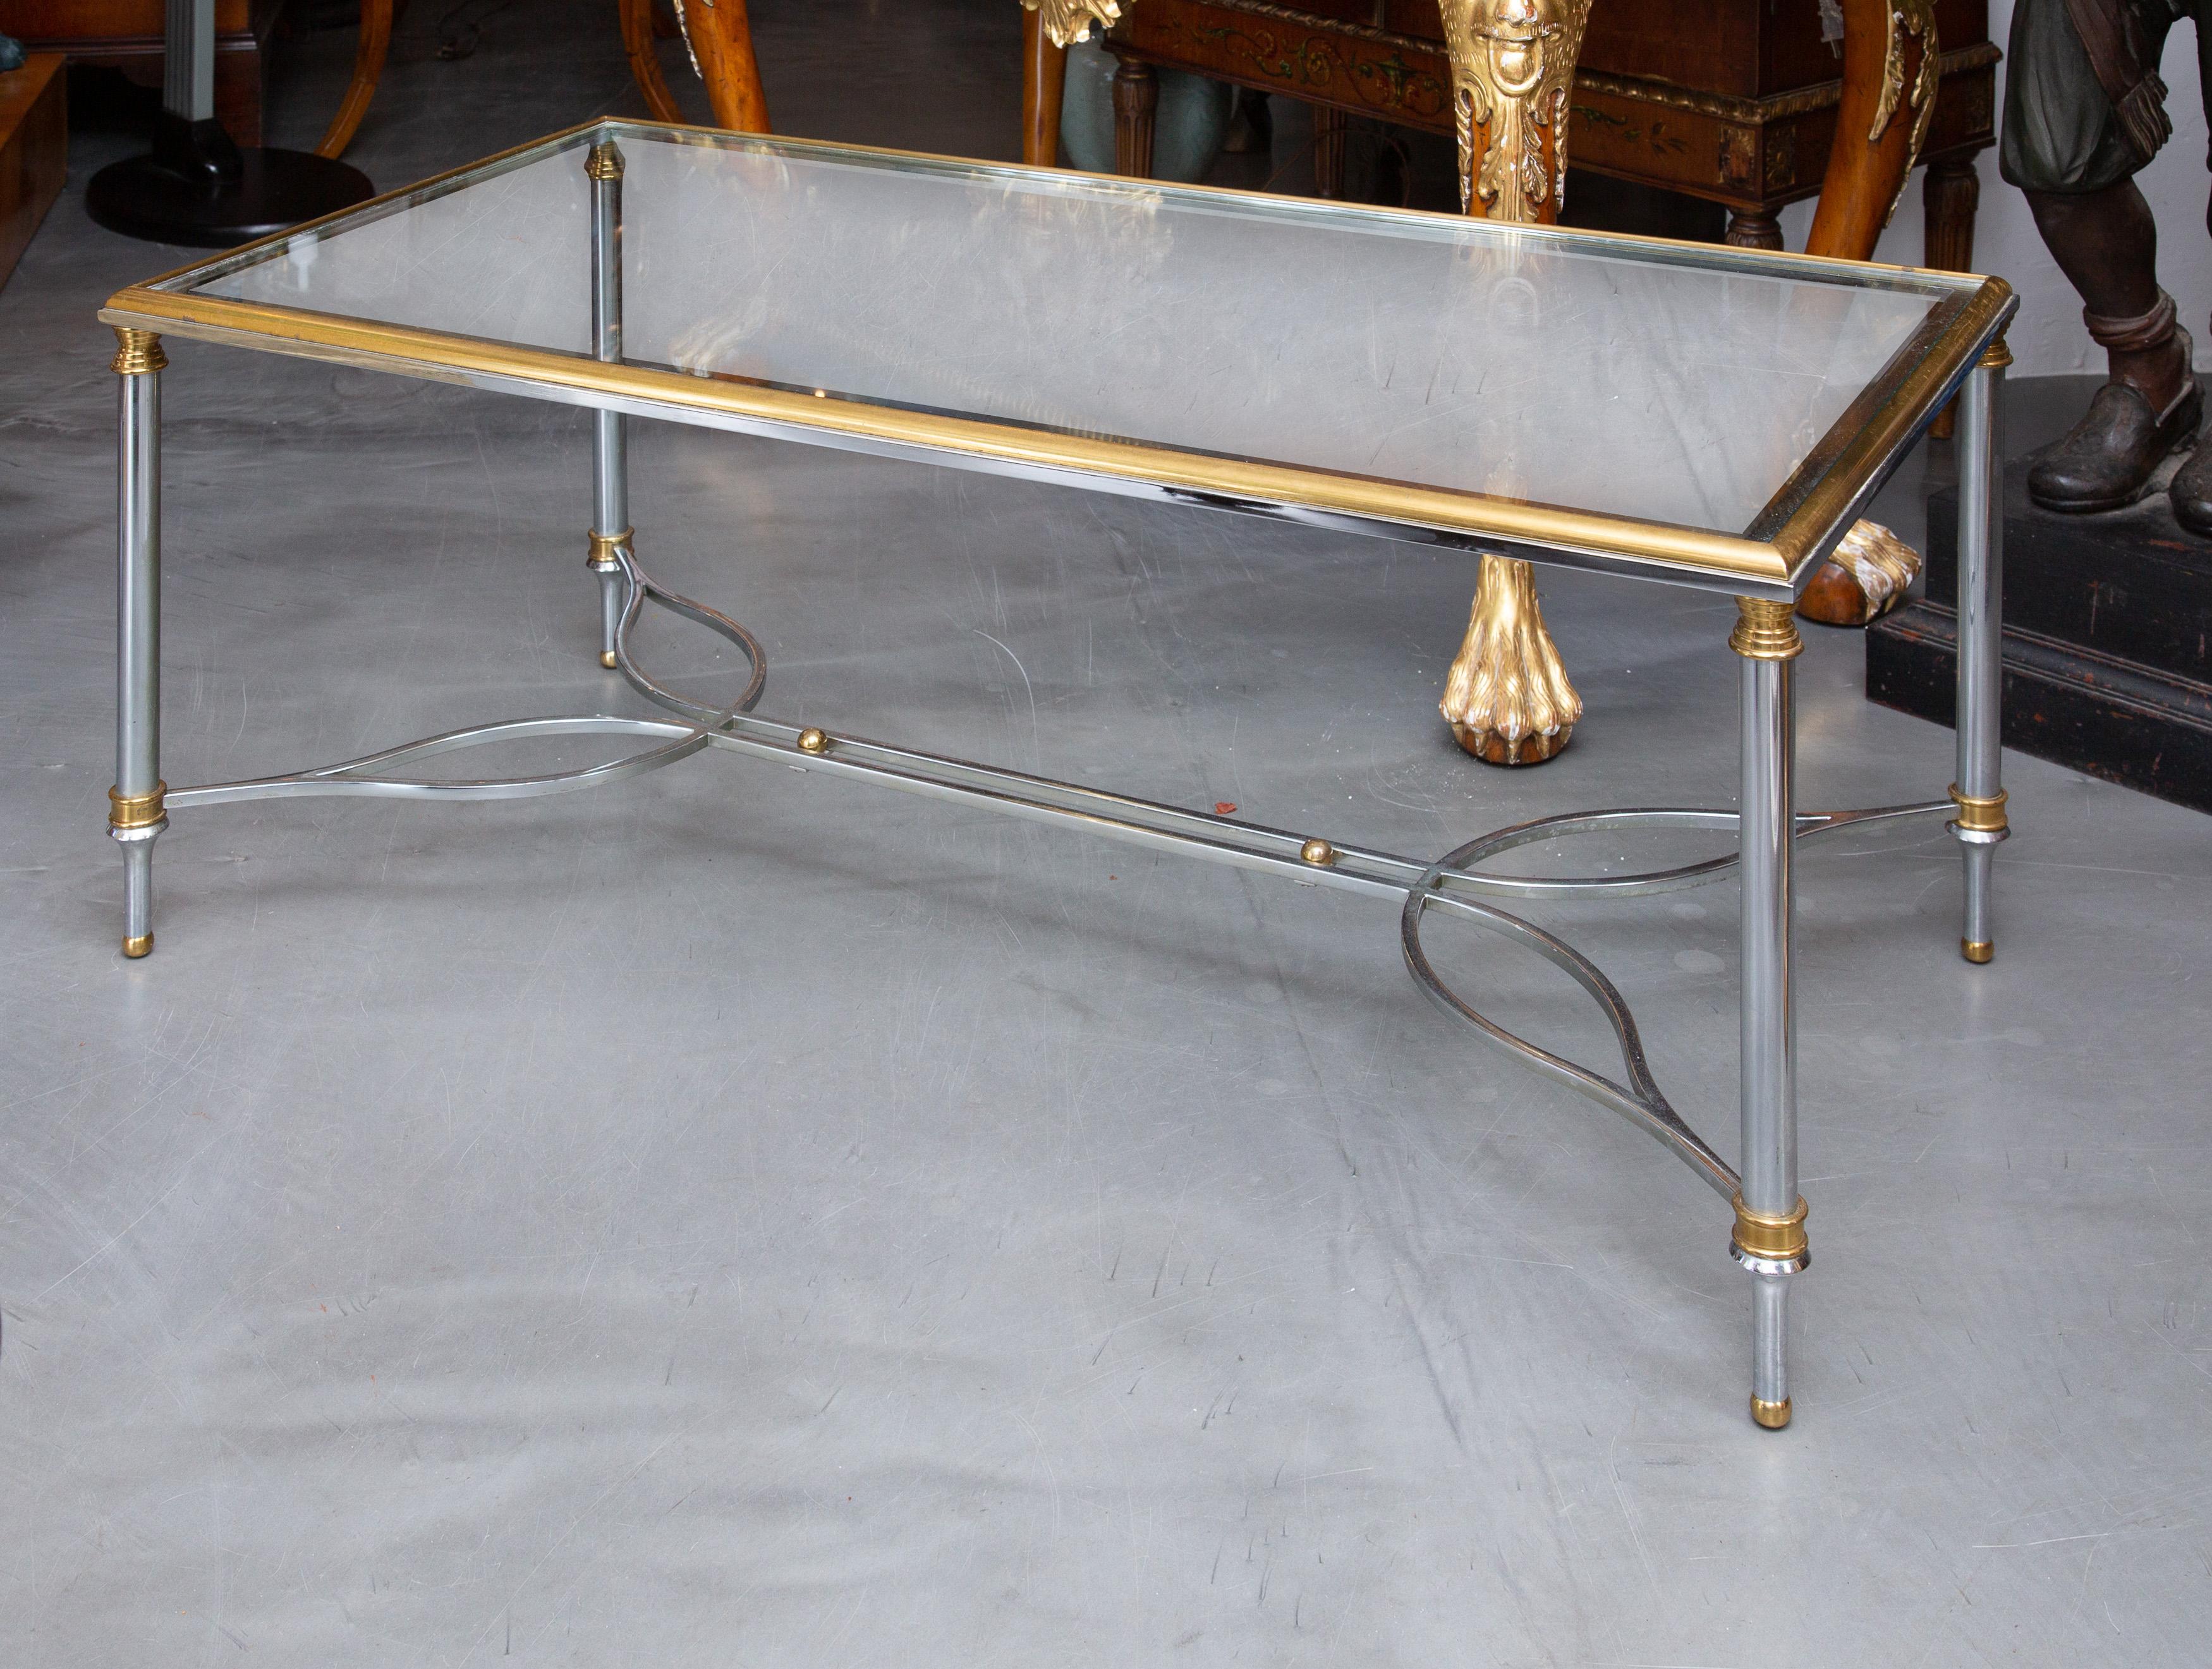 This a sophisticated brushed steel and brass glass top coffee table, attributed to Maison Jansen, based on quality, design and materials, circa 1950.